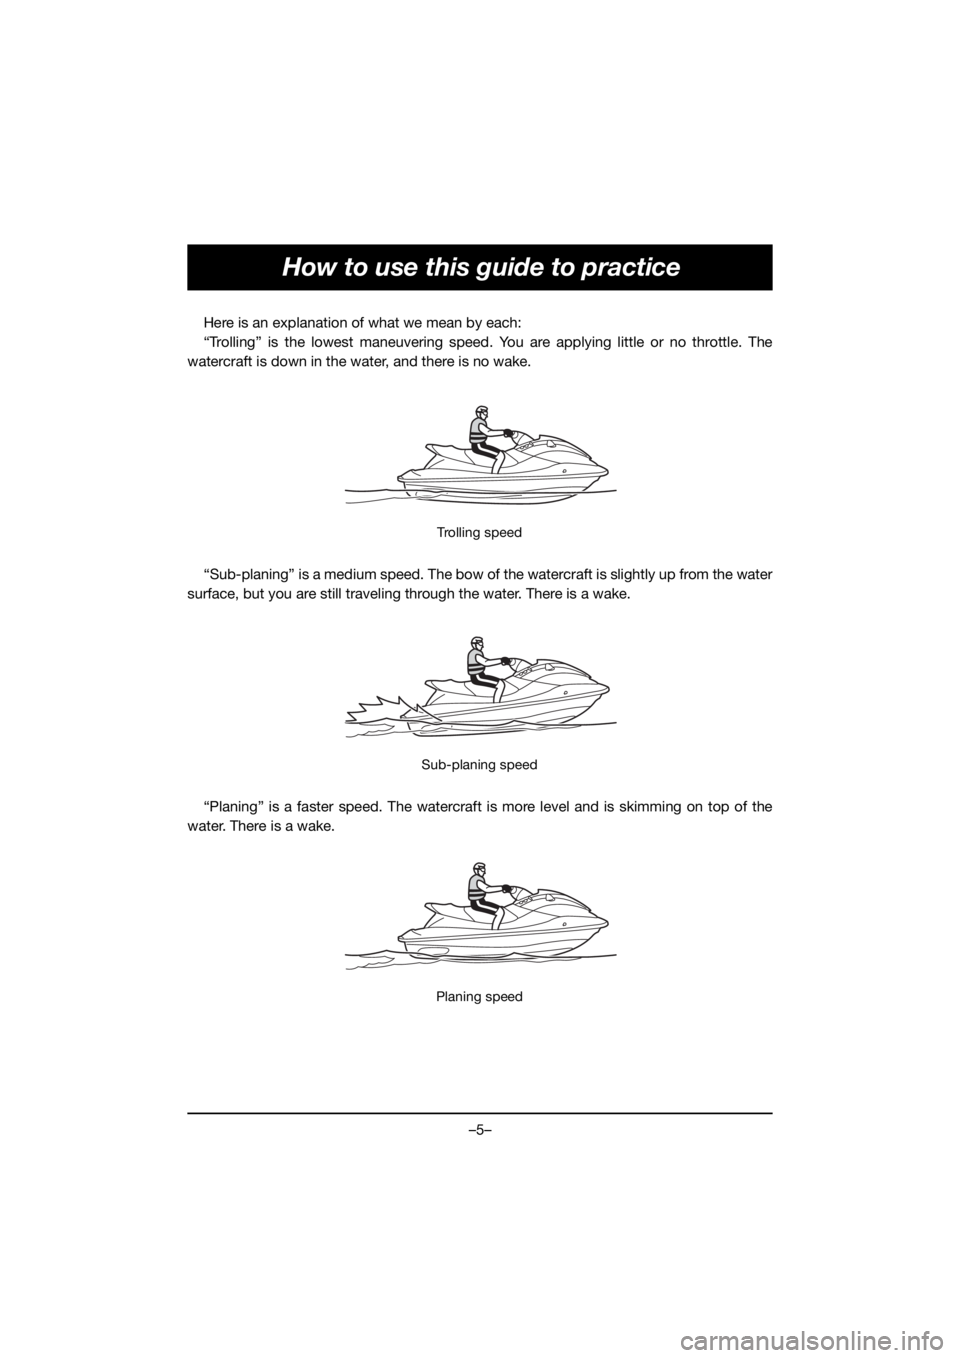 YAMAHA EX SPORT 2020  Manual de utilização (in Portuguese) –5–
How to use this guide to practice
Here is an explanation of what we mean by each:
“Trolling” is the lowest maneuvering speed. You are applying little or no throttle. The
watercraft is down